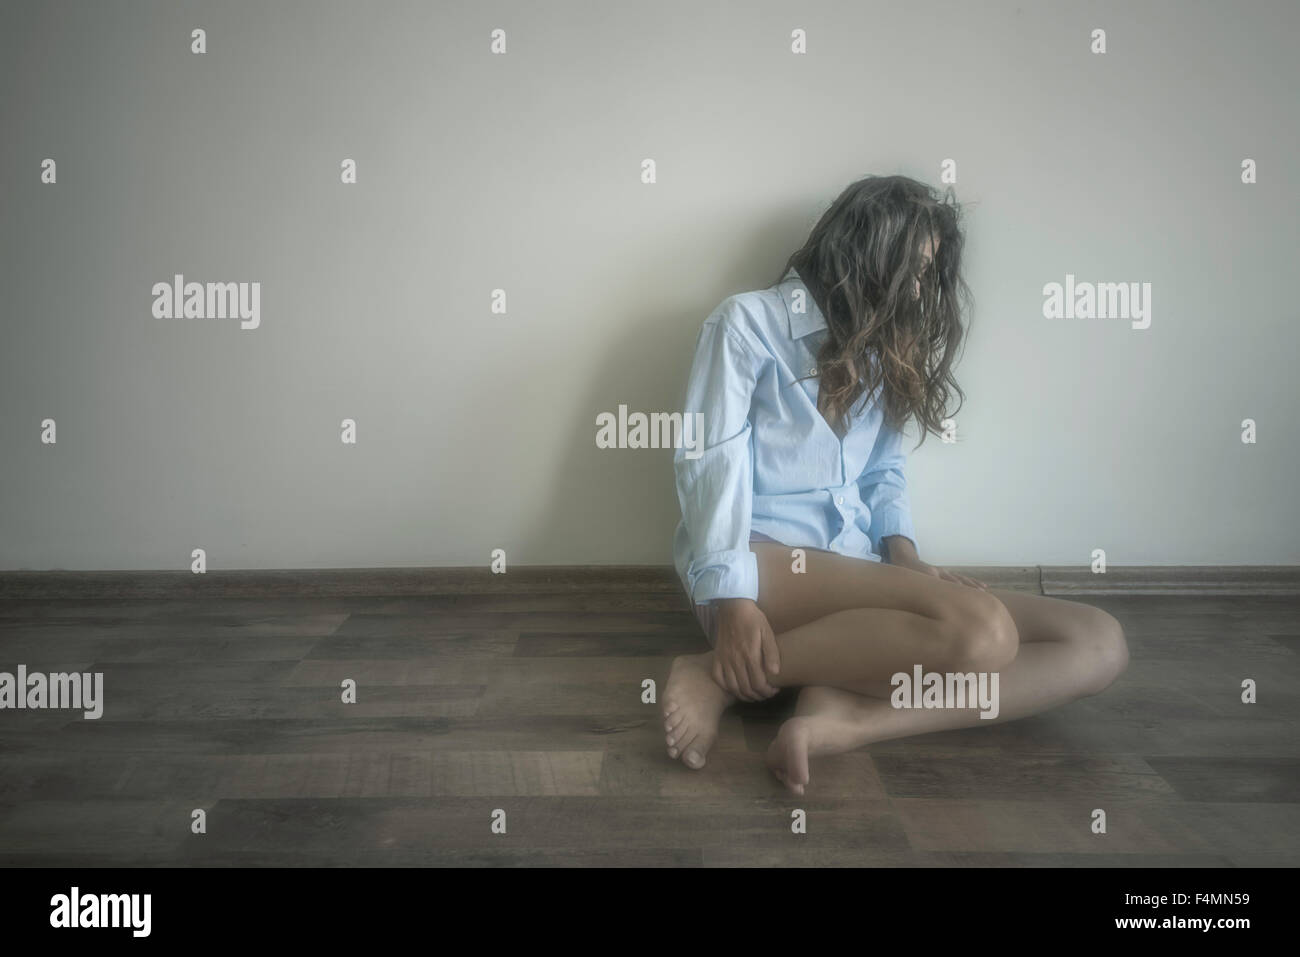 sad woman sitting alone in a empty room Stock Photo